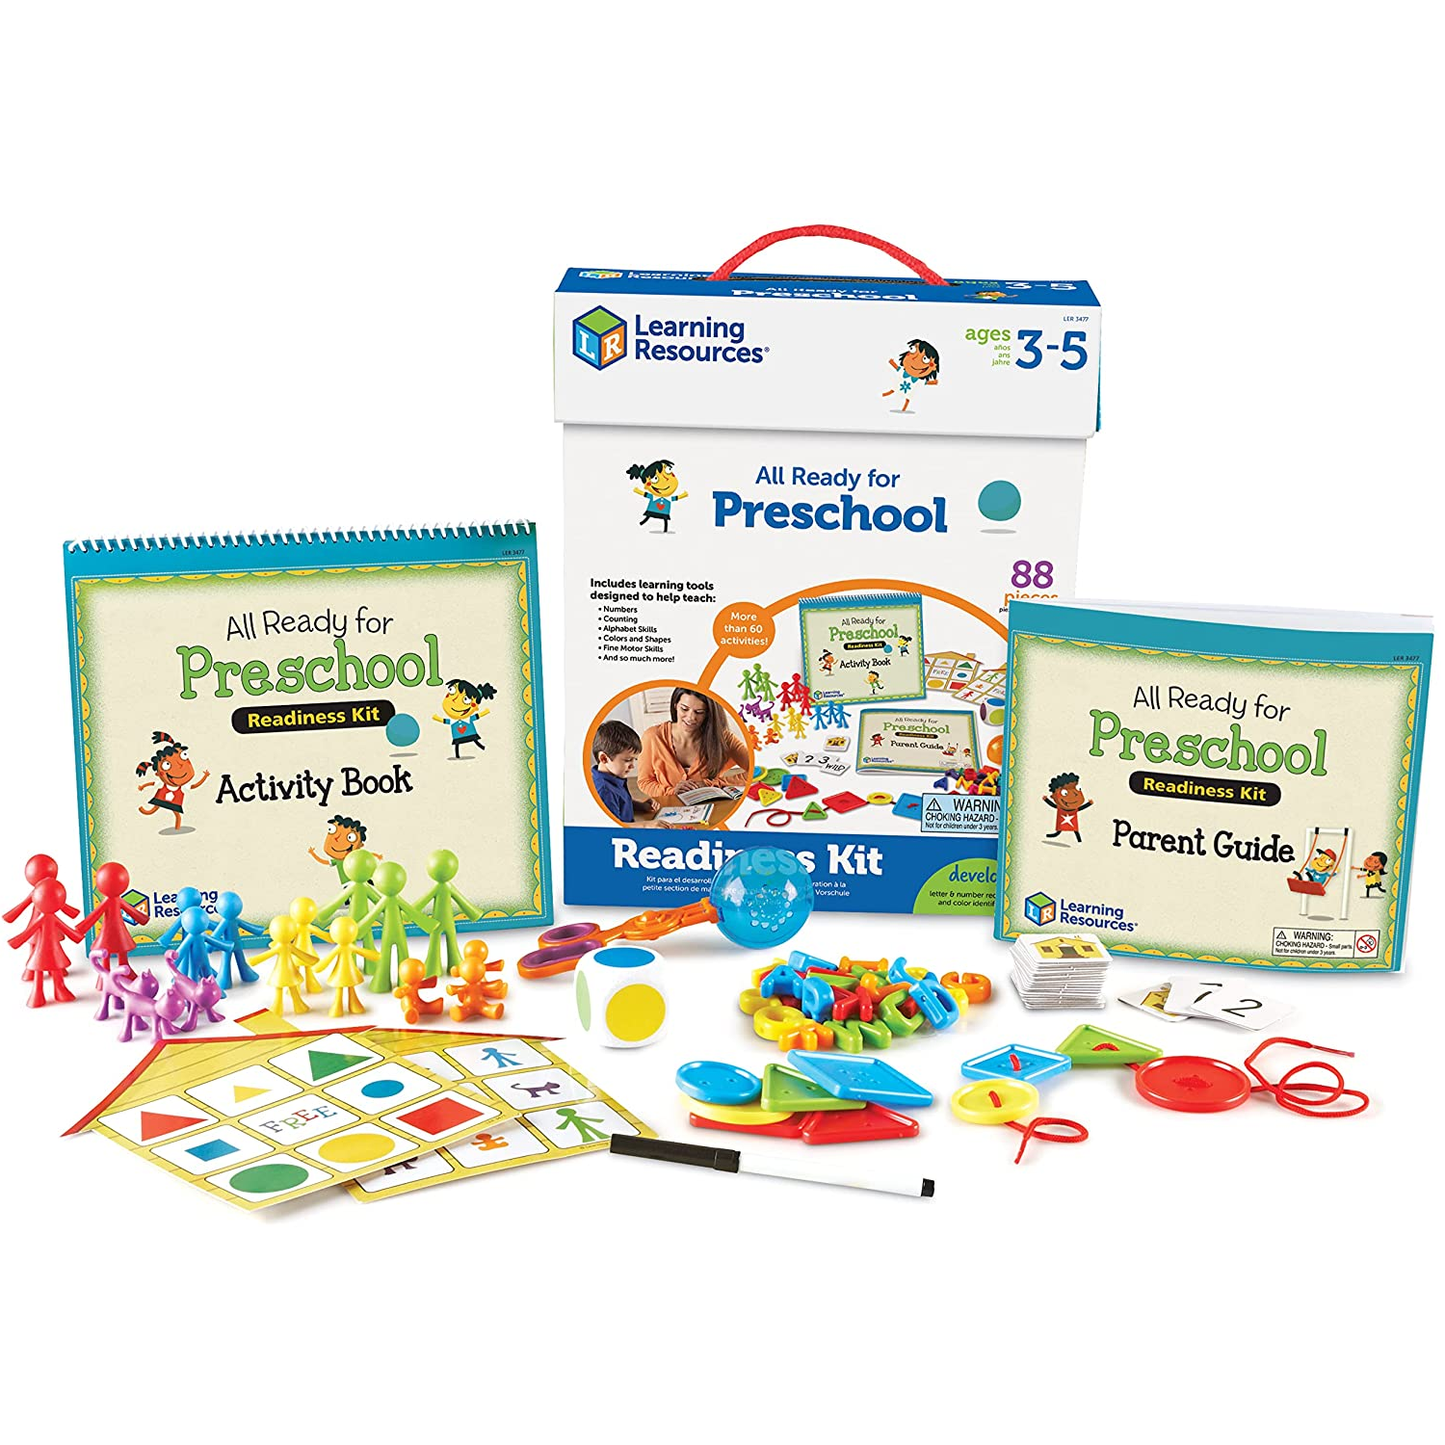 All Ready For Preschool Readiness Kit